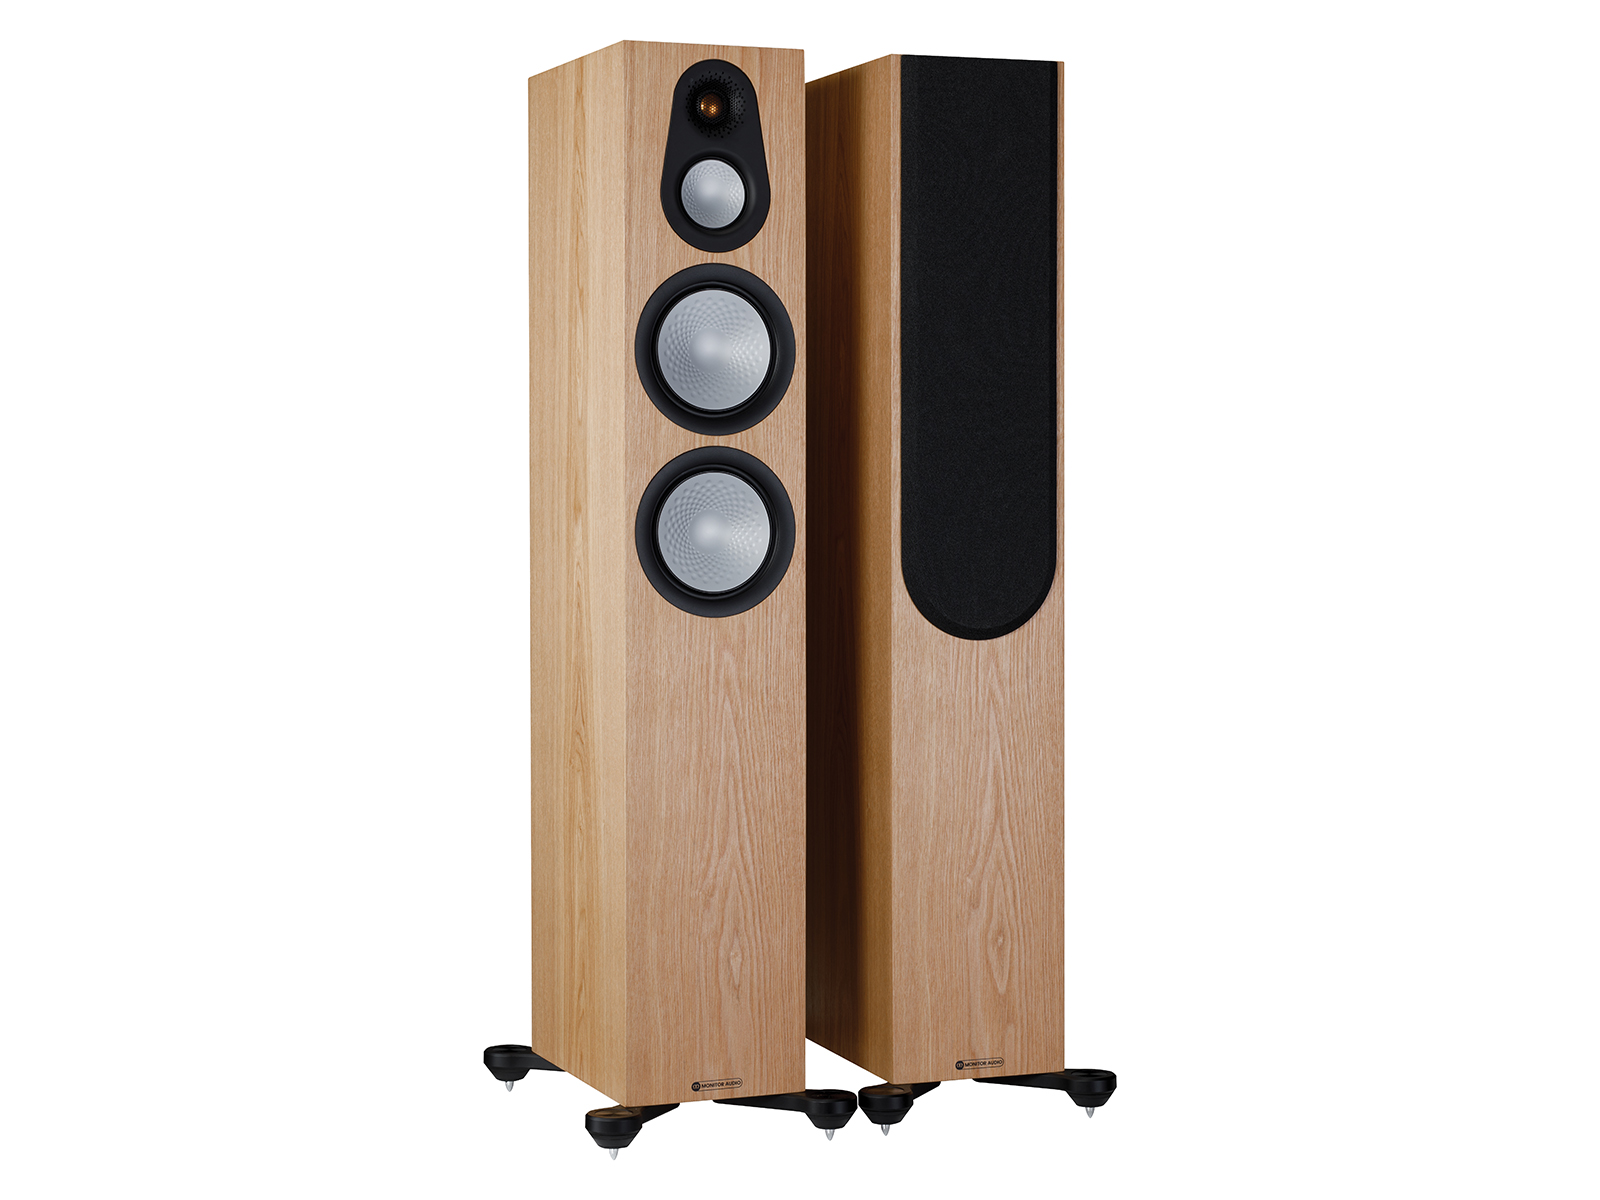 A pair of Monitor Audio's Silver 300 7G, in an ash finish, iso view, with and without grilles.